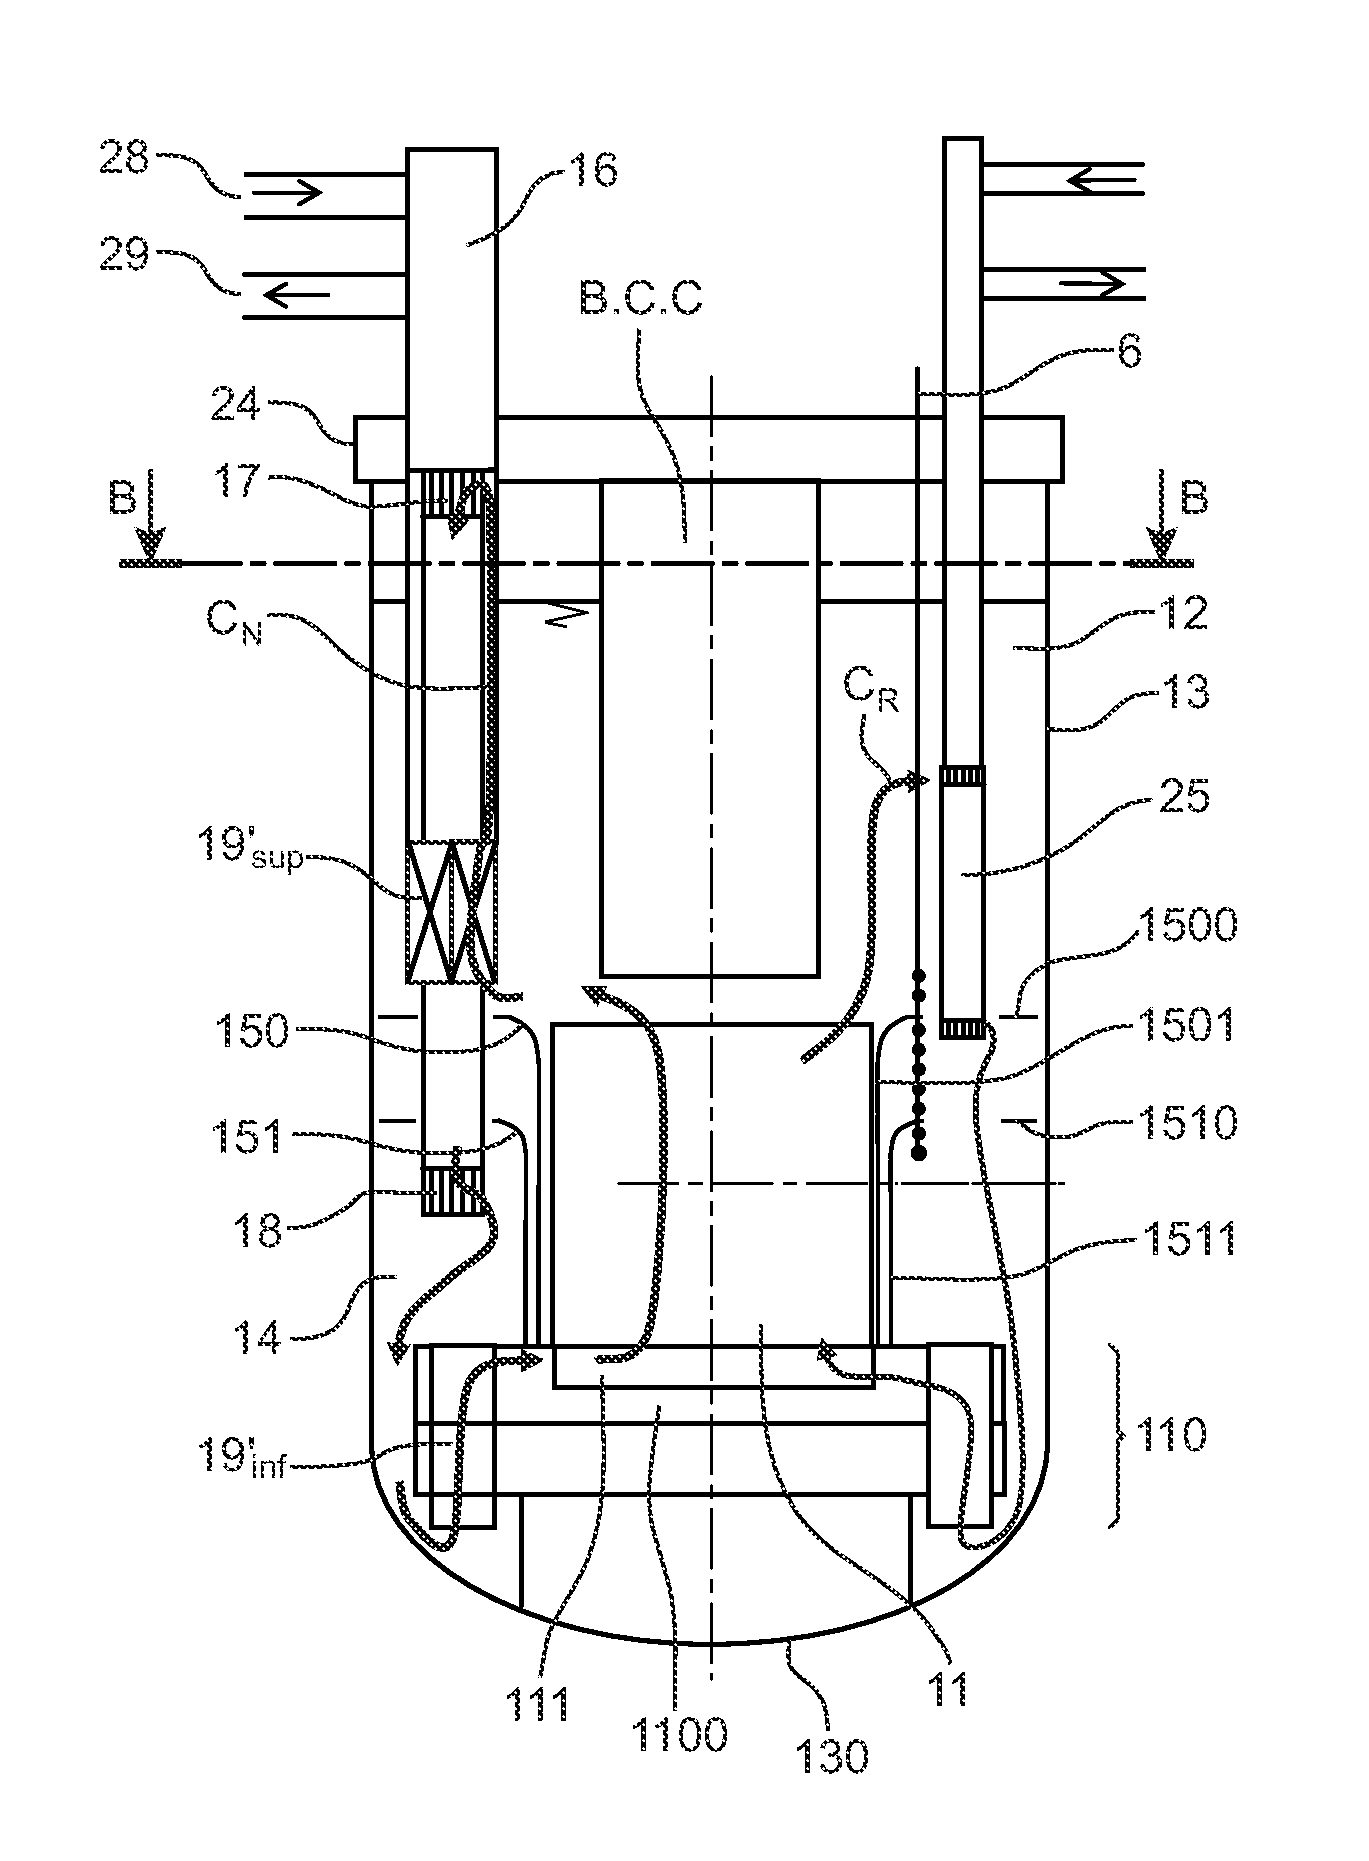 Sfr nuclear reactor of the integrated type with improved compactness and convection